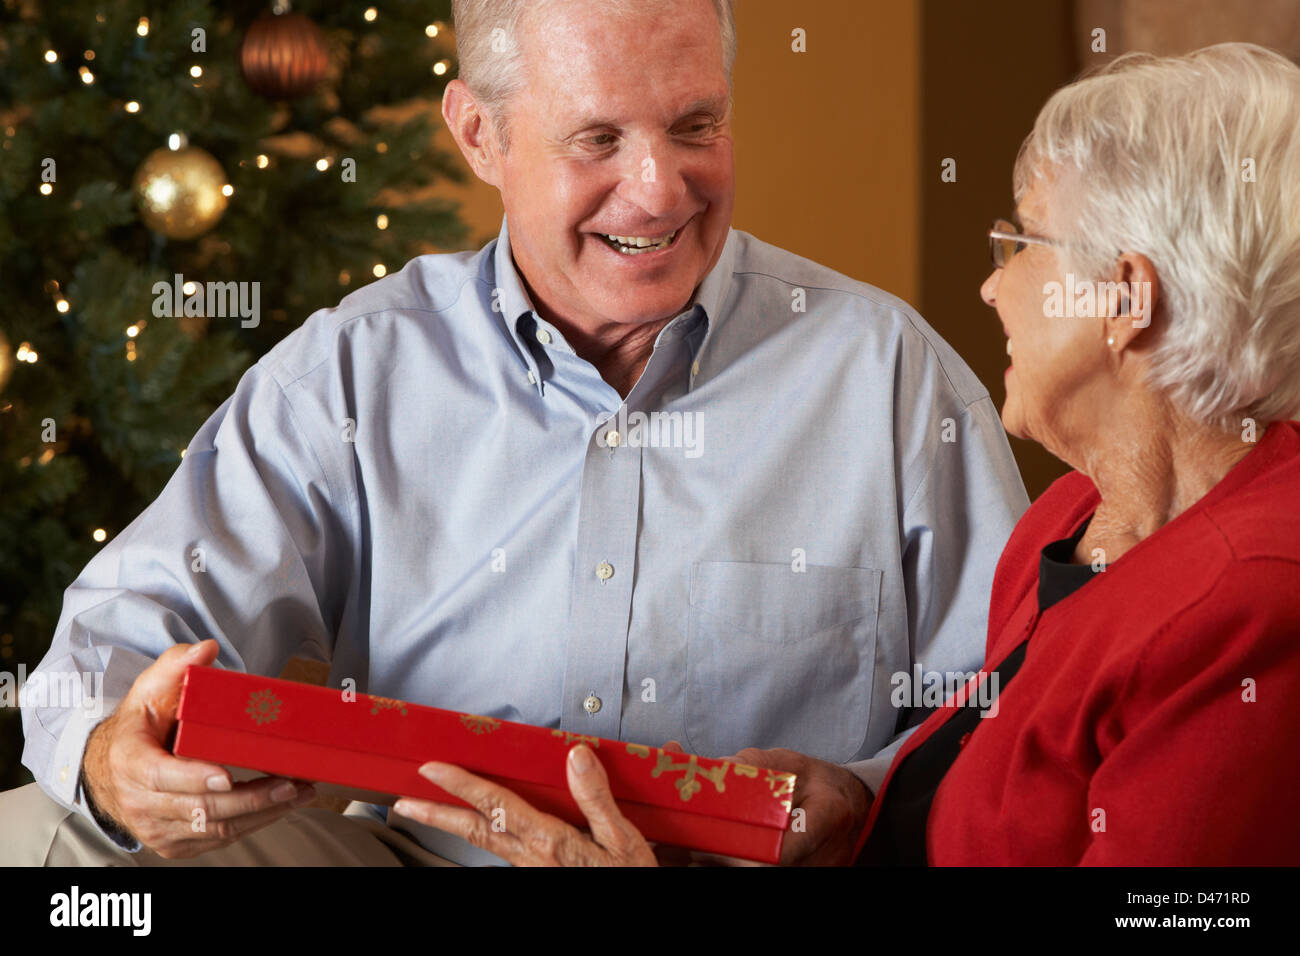 Senior Couple Exchanging Gifts In Front Of Christmas Tree Stock Photo